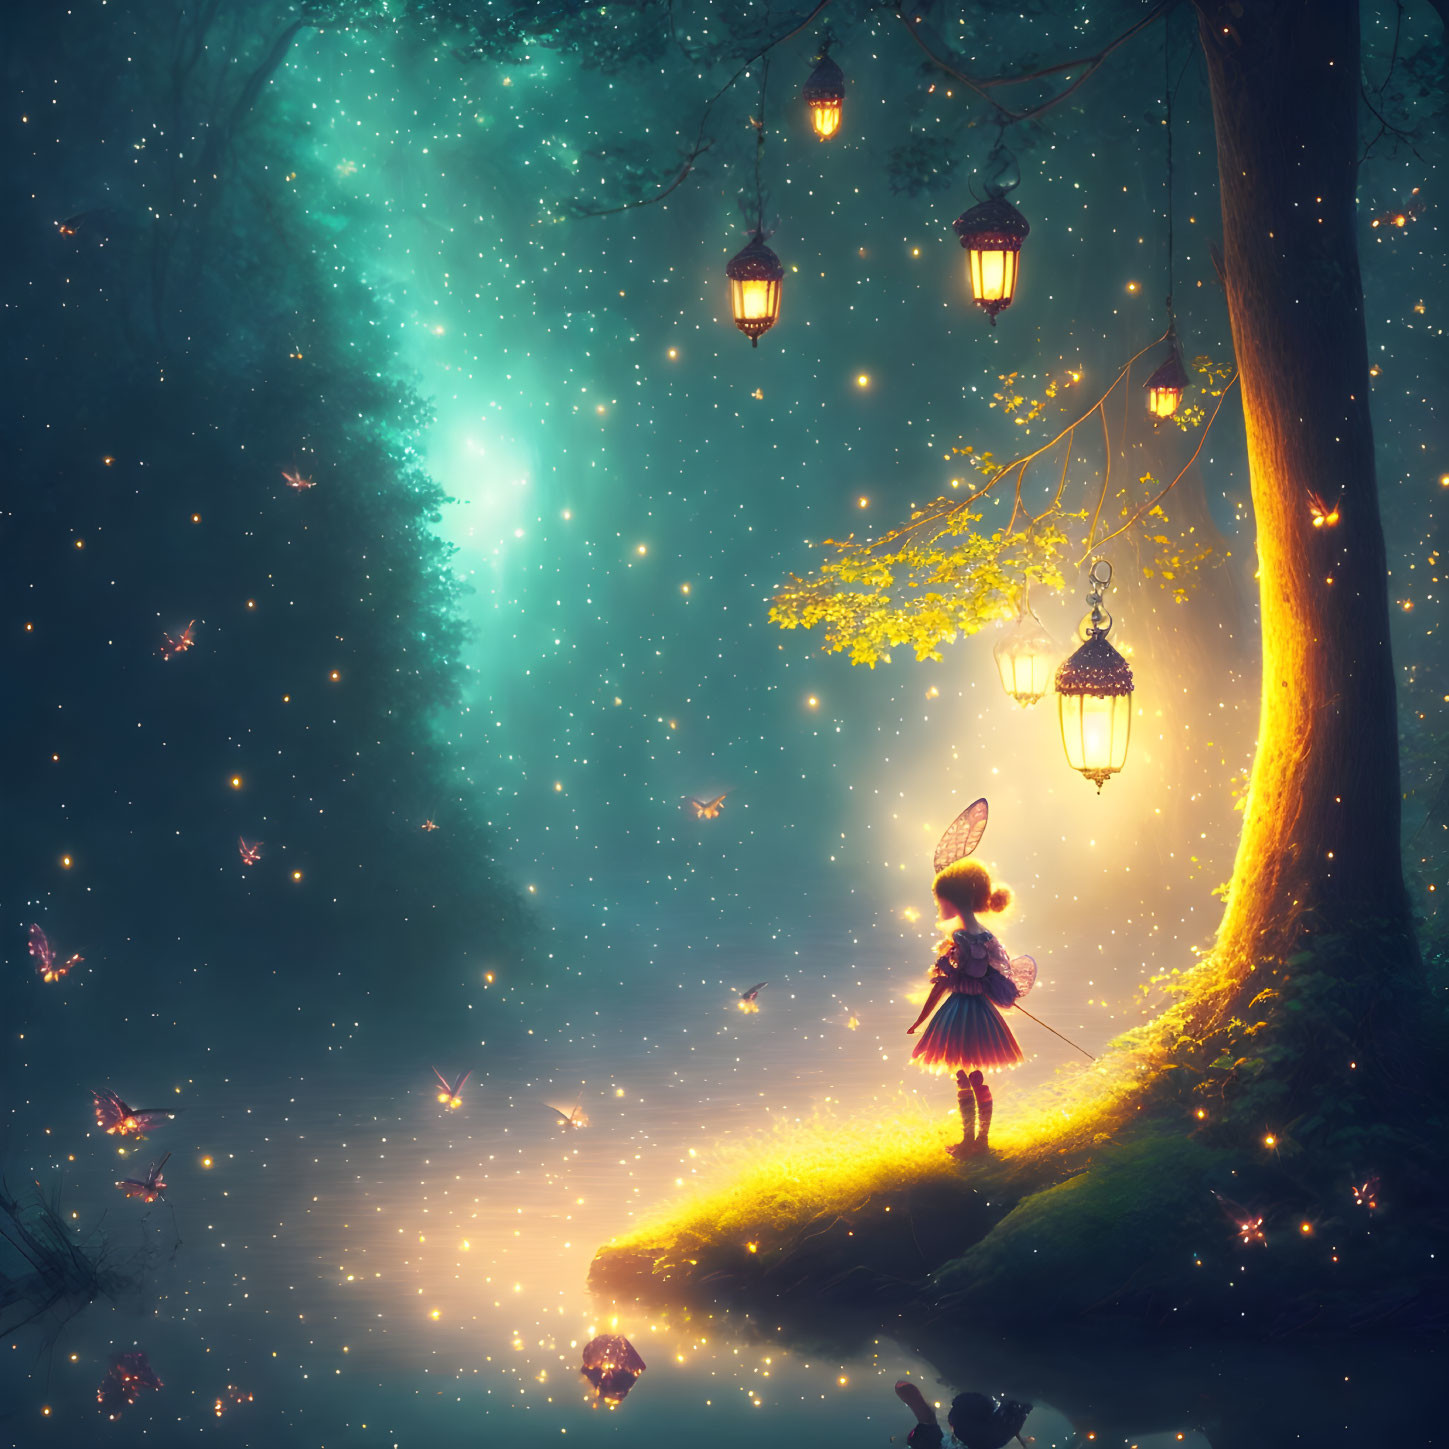 Enchanting forest scene with hanging lanterns, glowing path, and stargazing figure